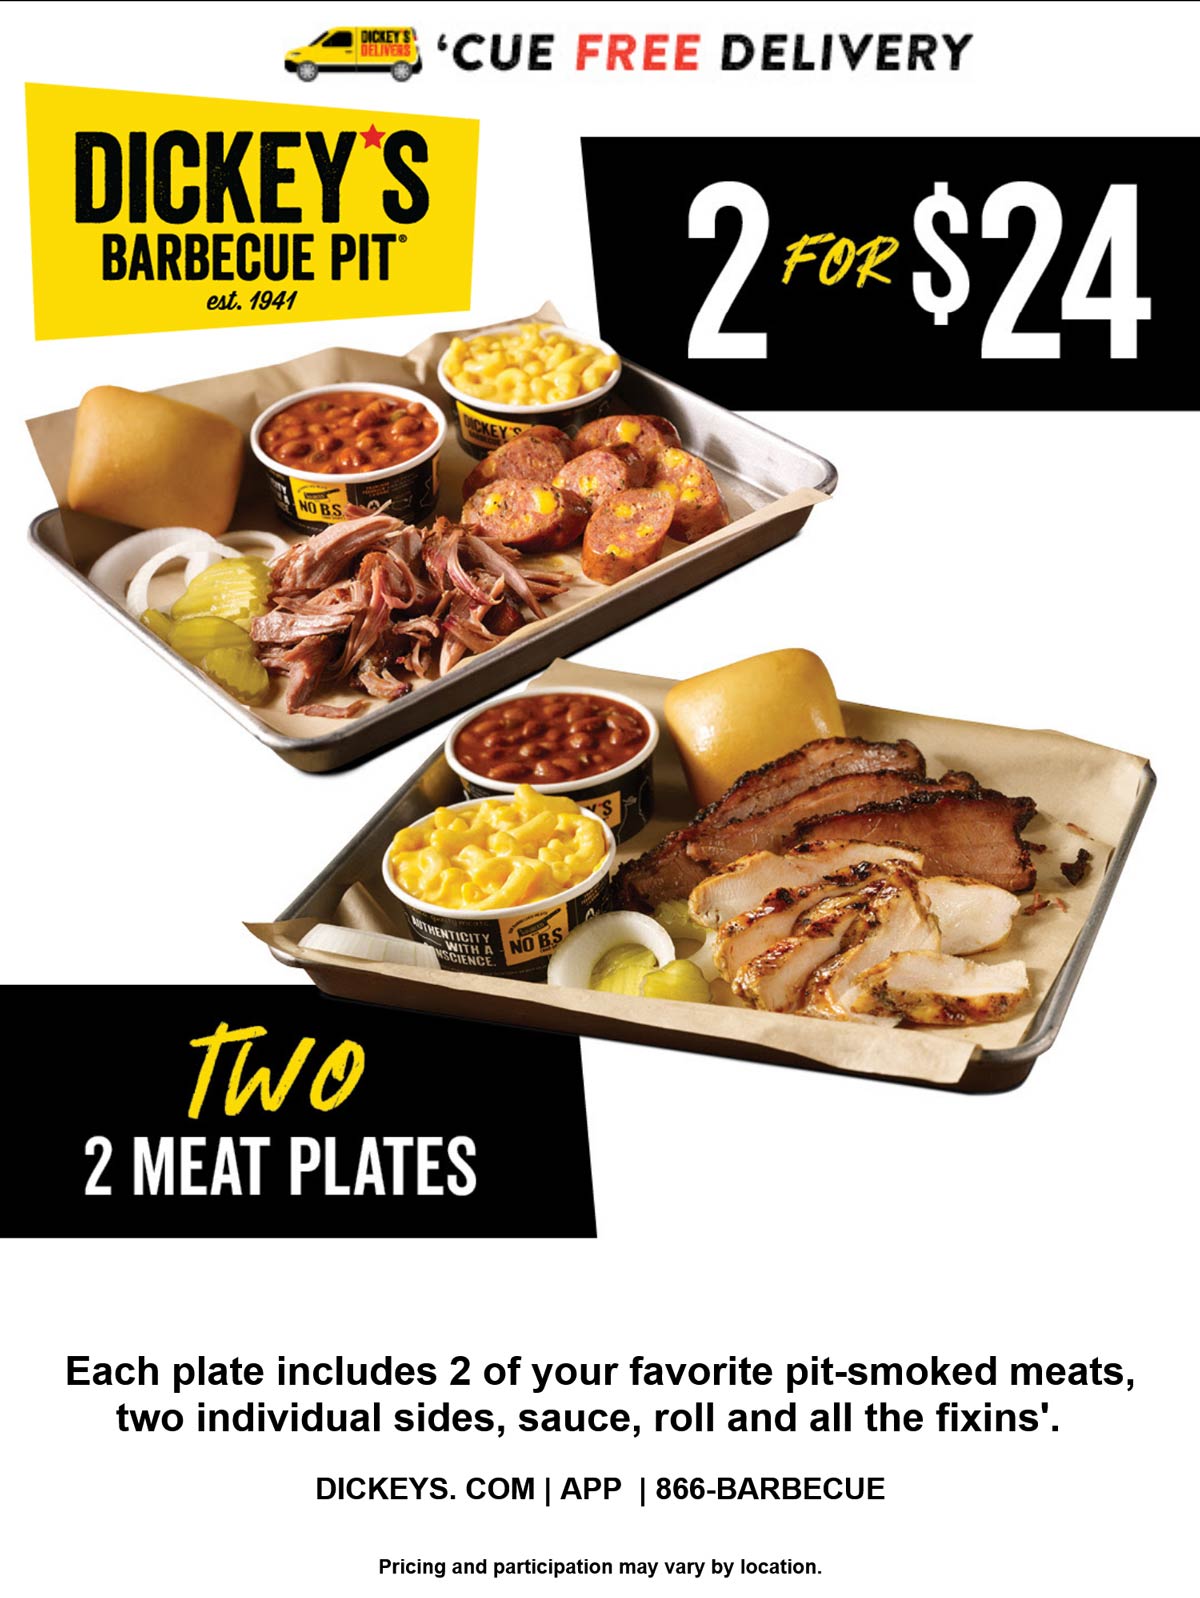 Dickeys Barbecue Pit restaurants Coupon  2 meat plates + 4 sides + rolls sauce & fixins = $24 at Dickeys Barbecue Pit restaurants #dickeysbarbecuepit 